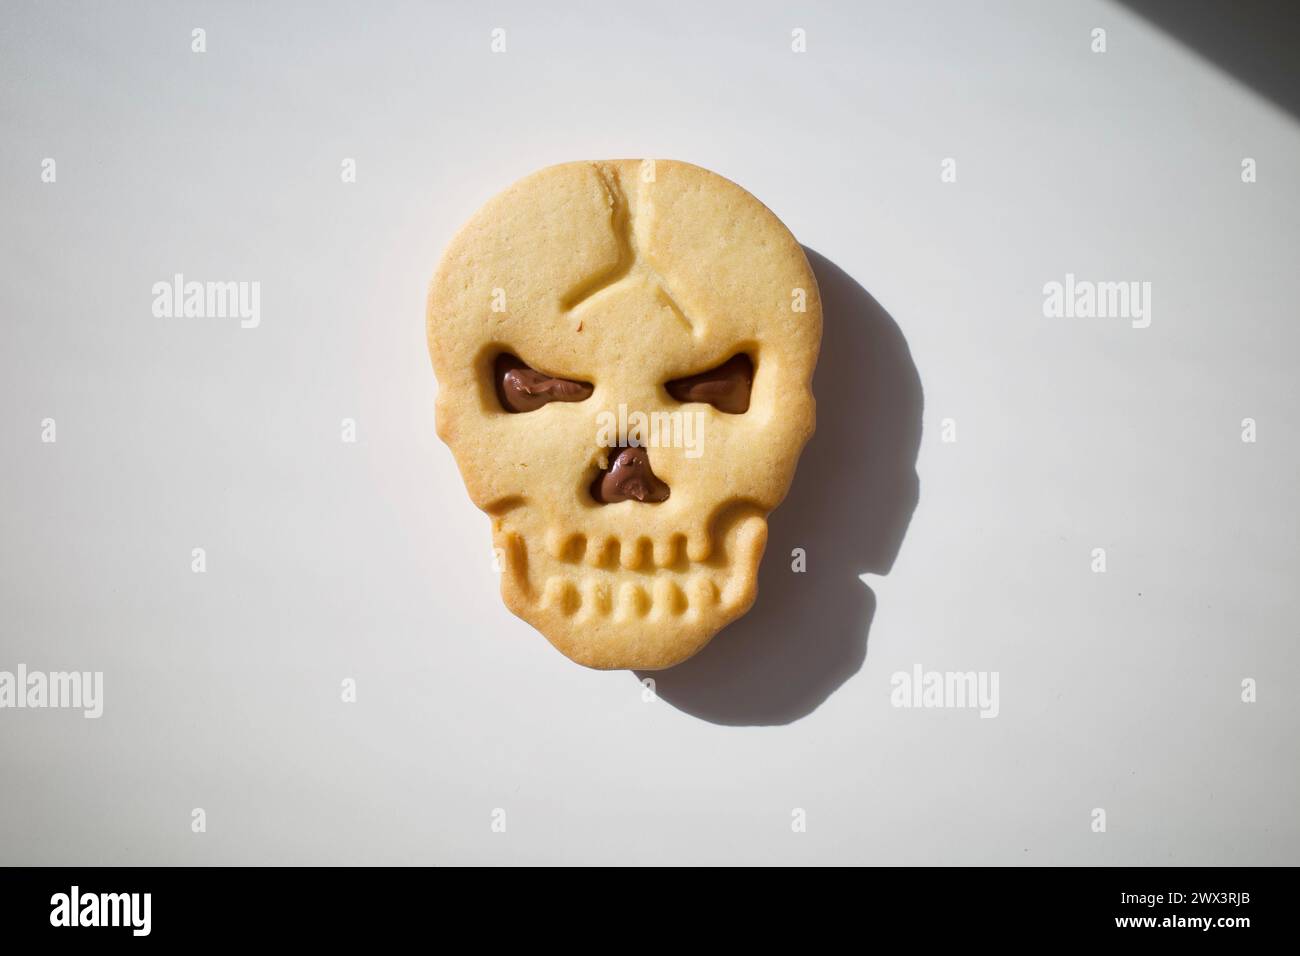 Skull shaped cookie for Halloween events Stock Photo